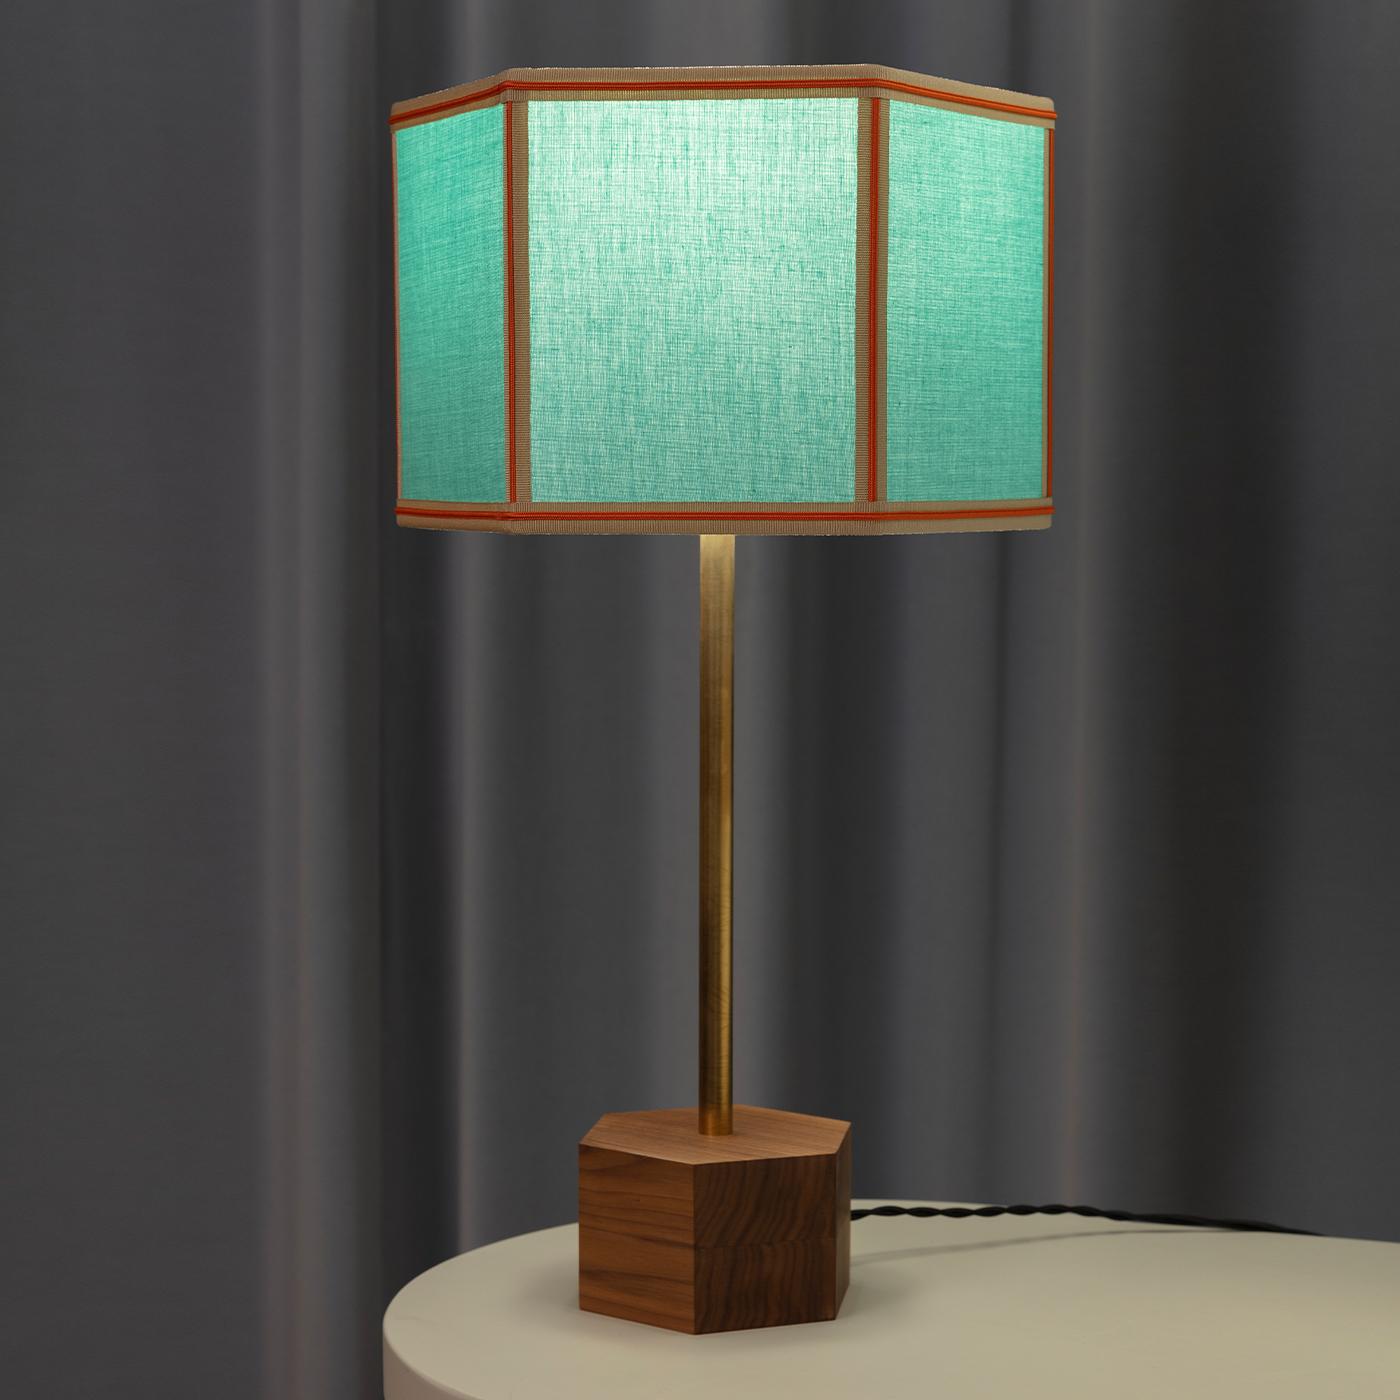 The Easy Floor Lamp is all about simple classic geometry, masterfully revisited through various color combinations. The lampshade cotton fabric is presented in block colors with contrasted trimmings and fringing around the bottom rim. The hexagonal